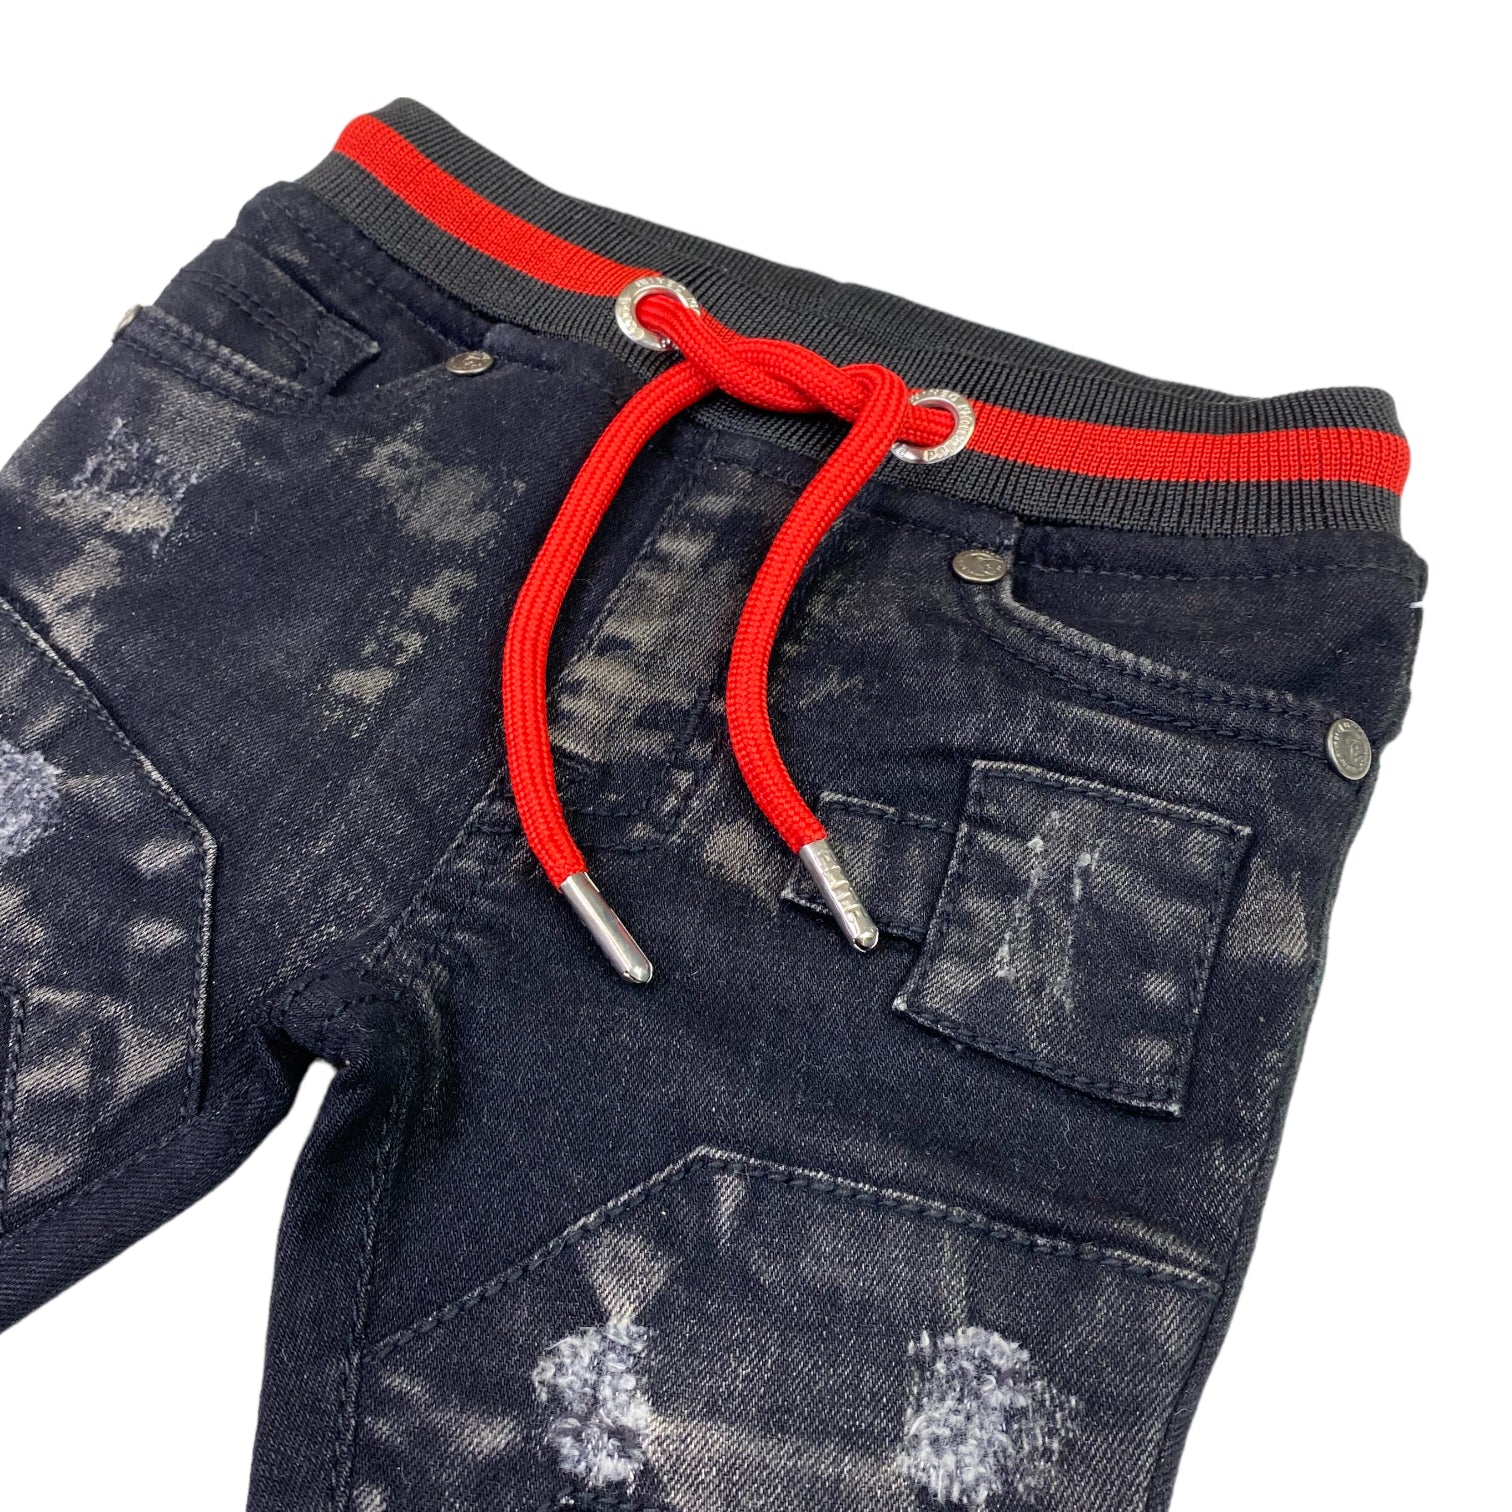 Faded Premium Infant Boys Flare Jeans